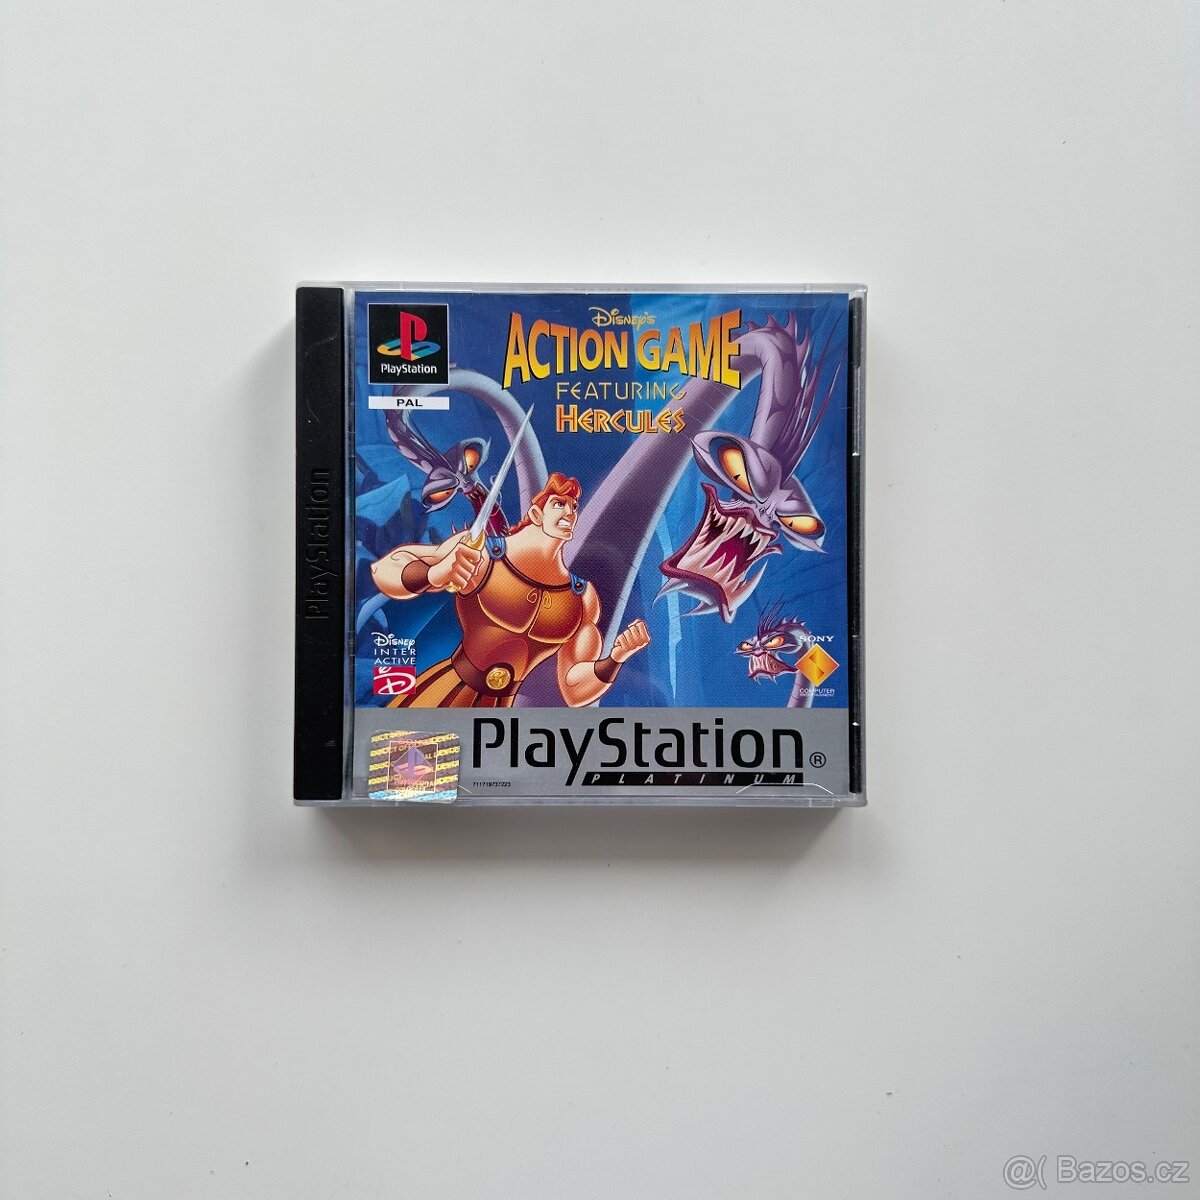 Disney’s Action Game Featuring Hercules hra pro Playstation